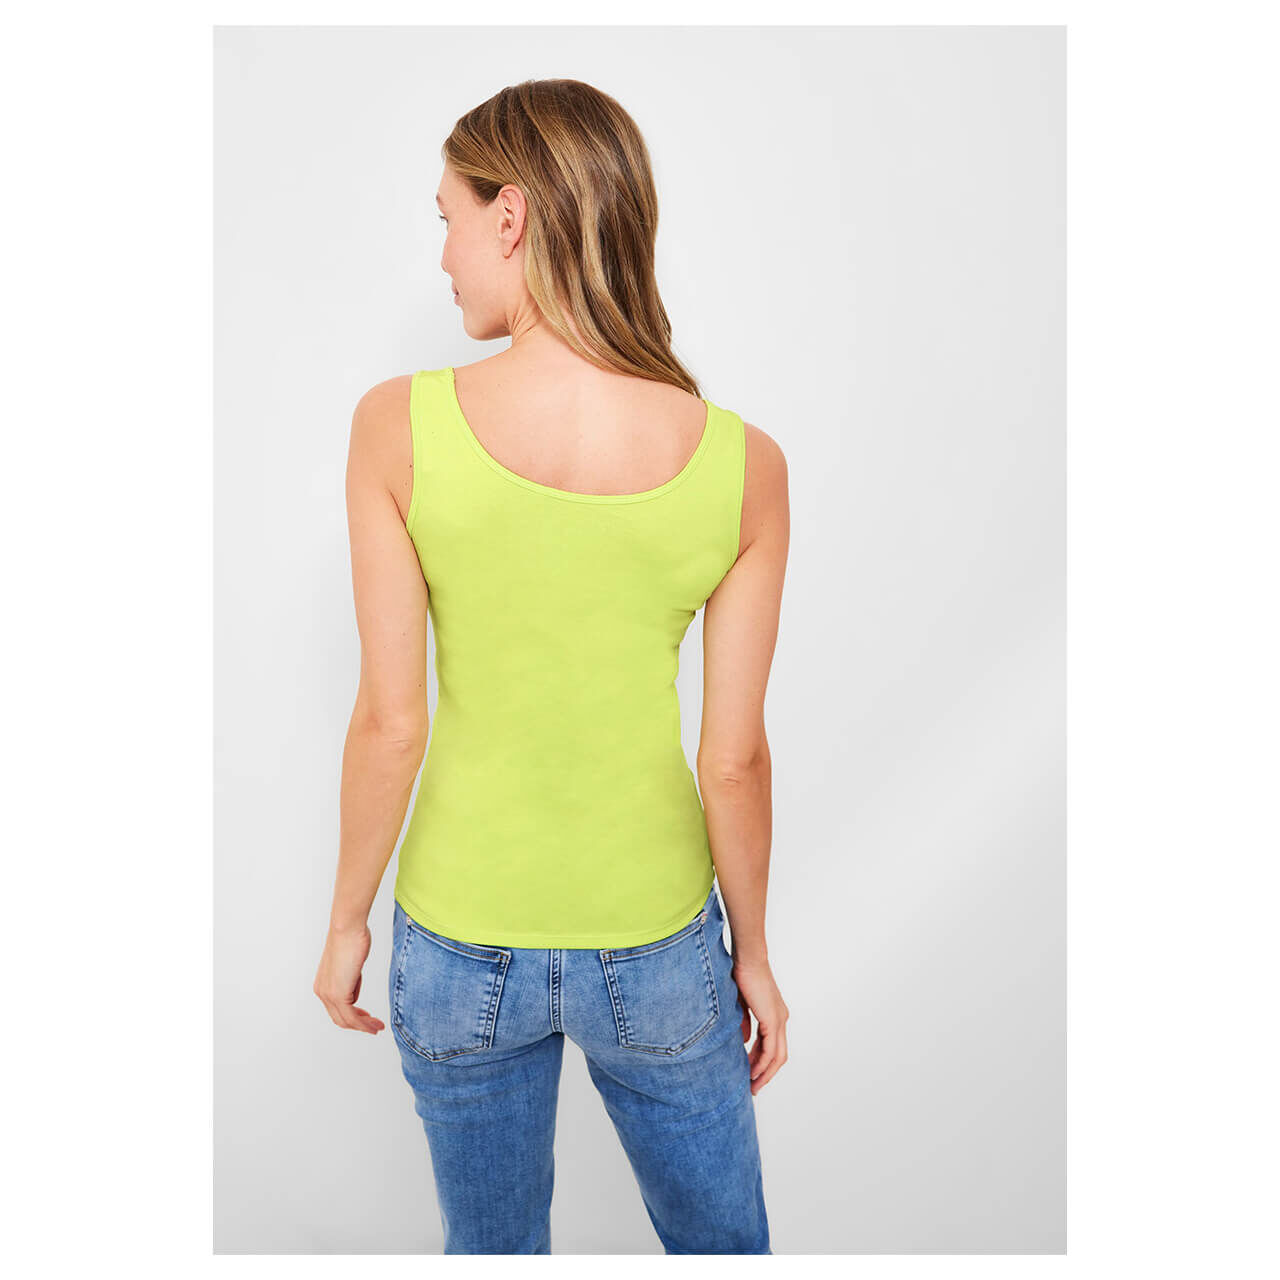 Cecil Linda Top limelight yellow